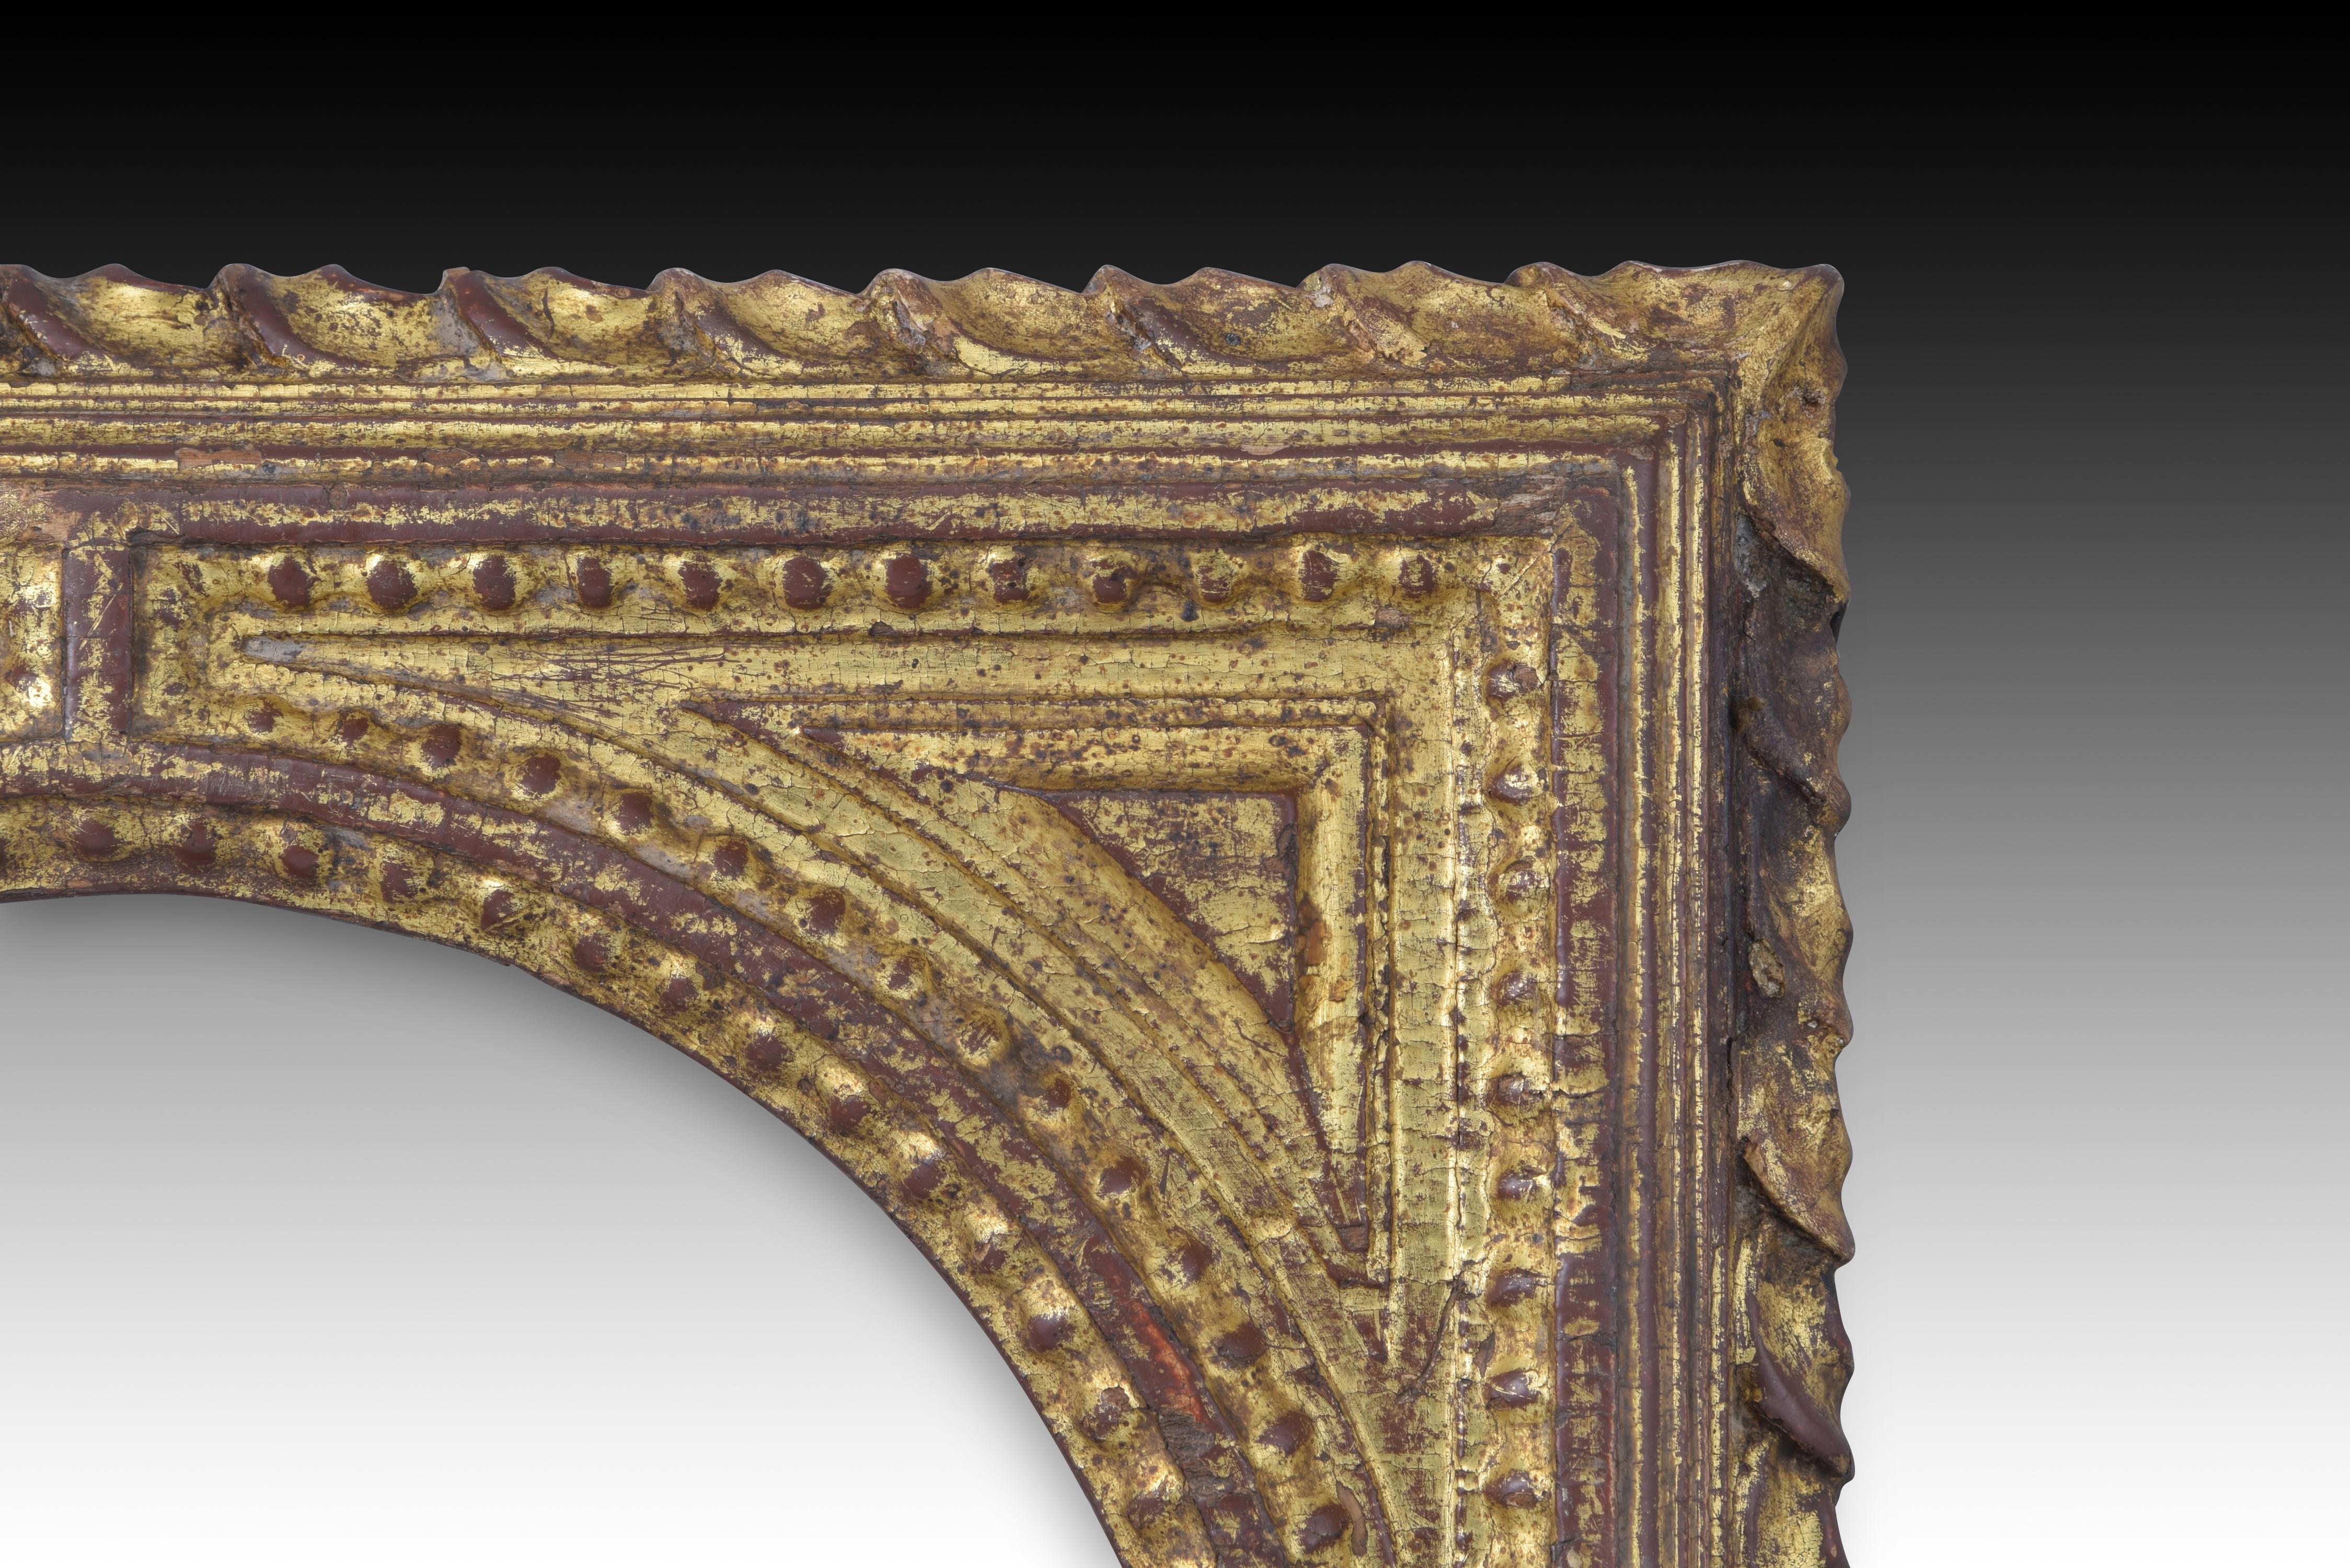 Frame. Carved and gilded wood. XVII century. 
Frame for tondo (the interior space is circular) made of carved and gilded wood, decorated with architectural reliefs of classicist influence and a wavy edge on the outside. In the past, frames used to